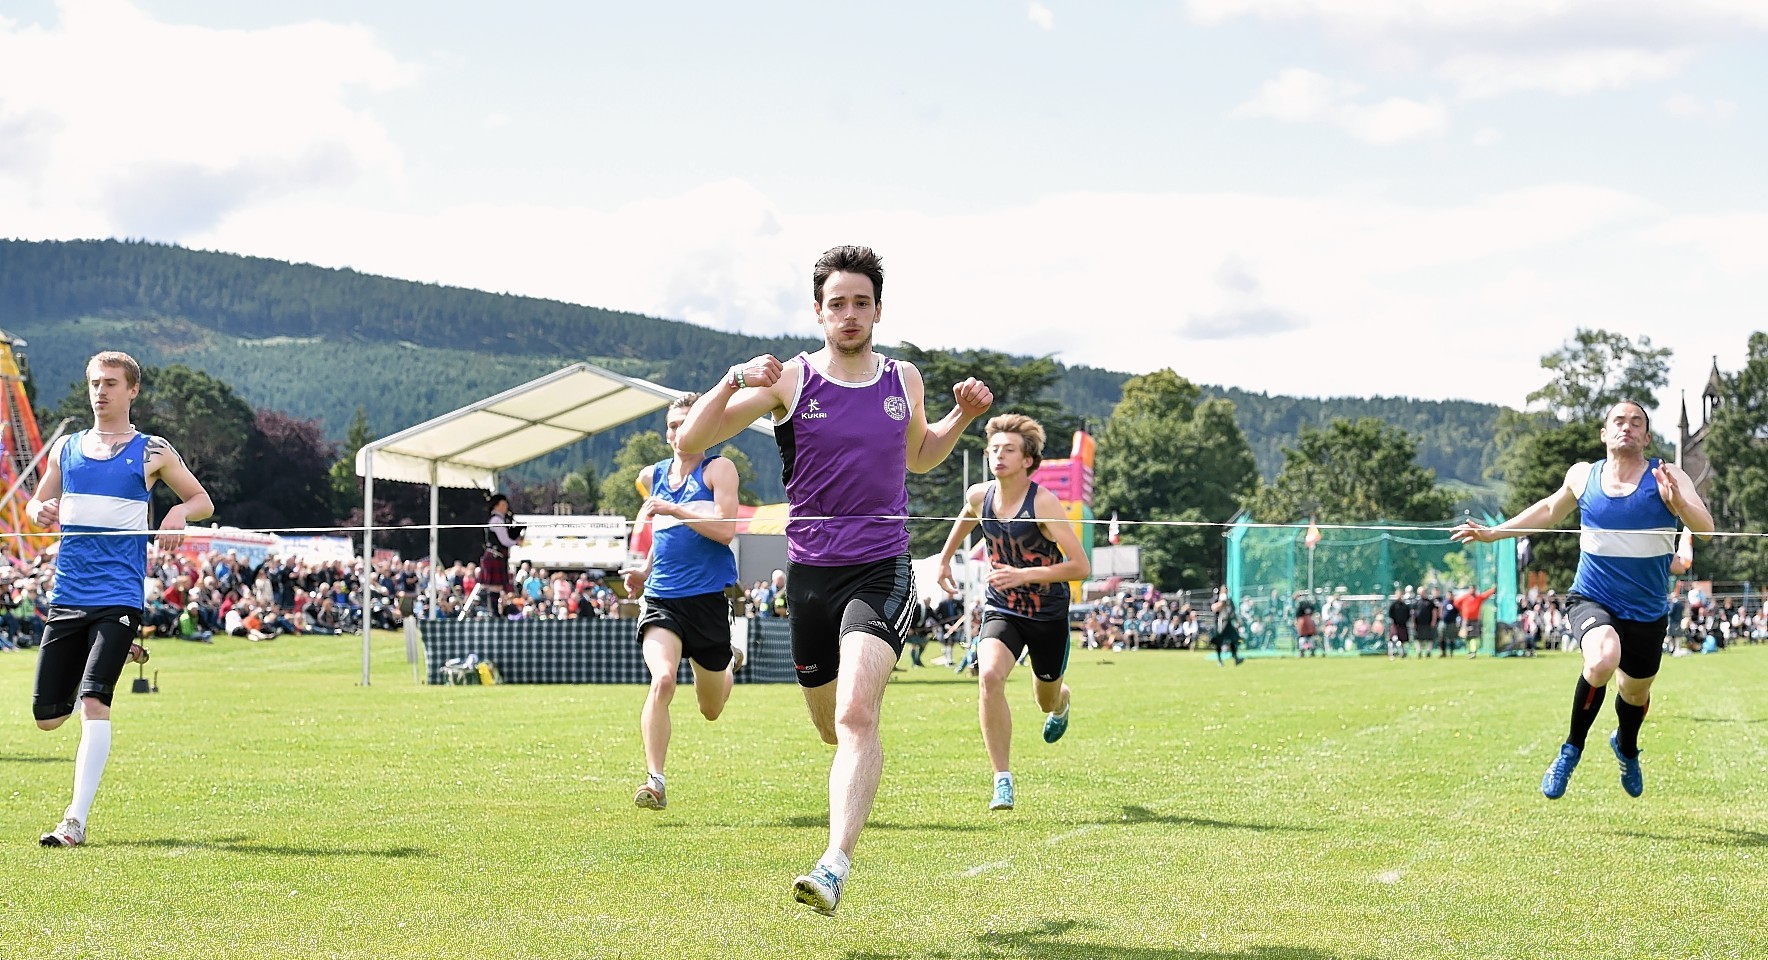 Aboyne Highland Games - winner of the 100 yard race - Sam Lyon from Aberdeen. Picture by COLIN RENNIE